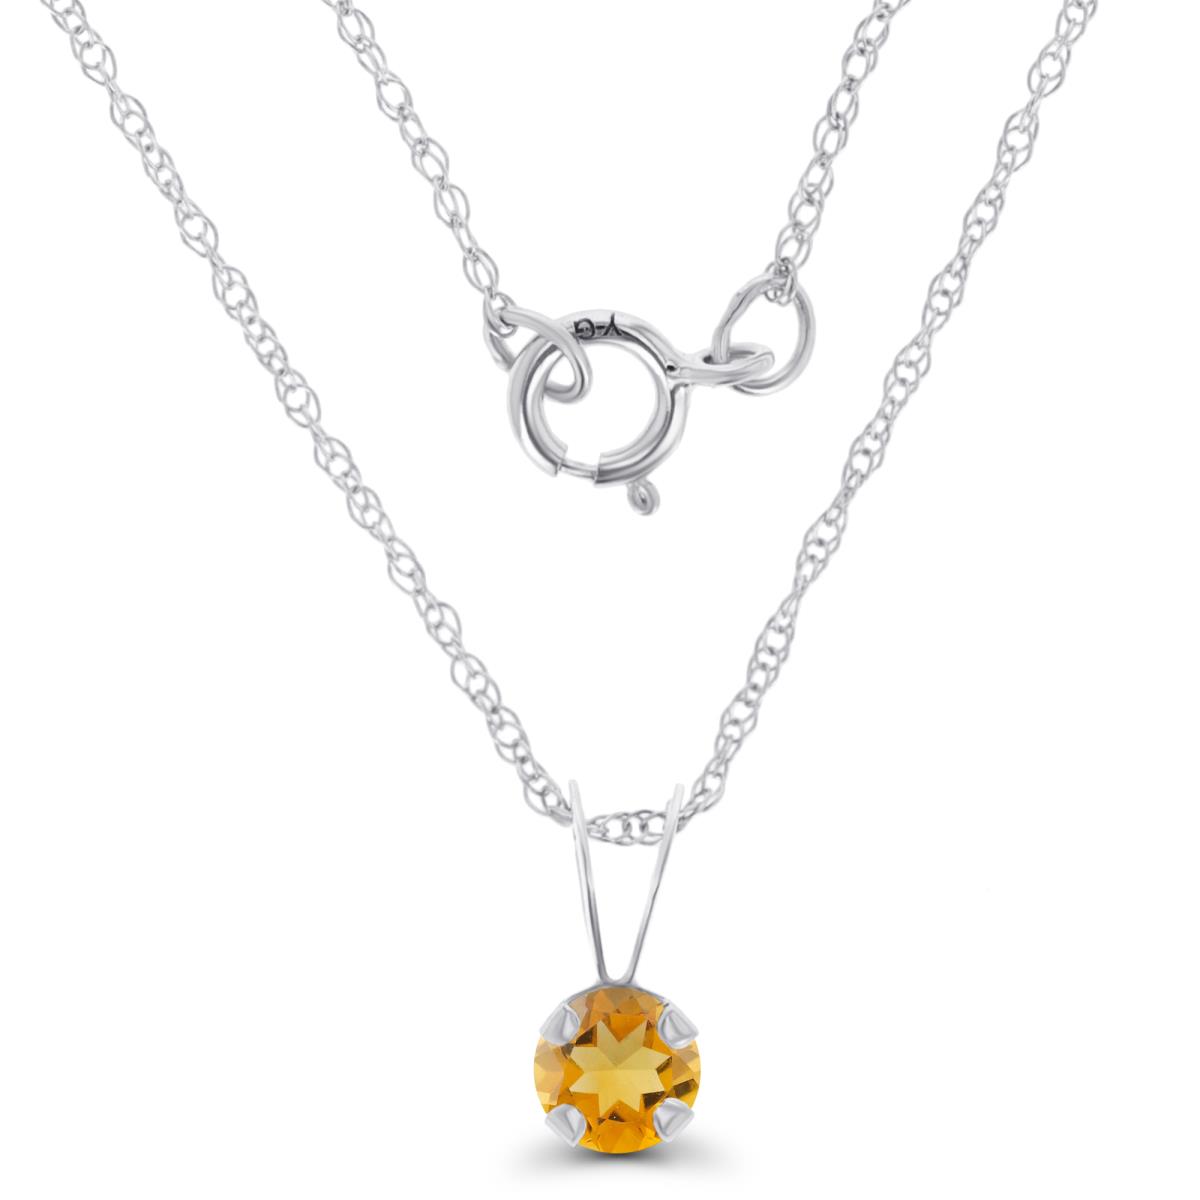 14K White Gold 4mm Round Citrine 18" Rope Chain Necklace